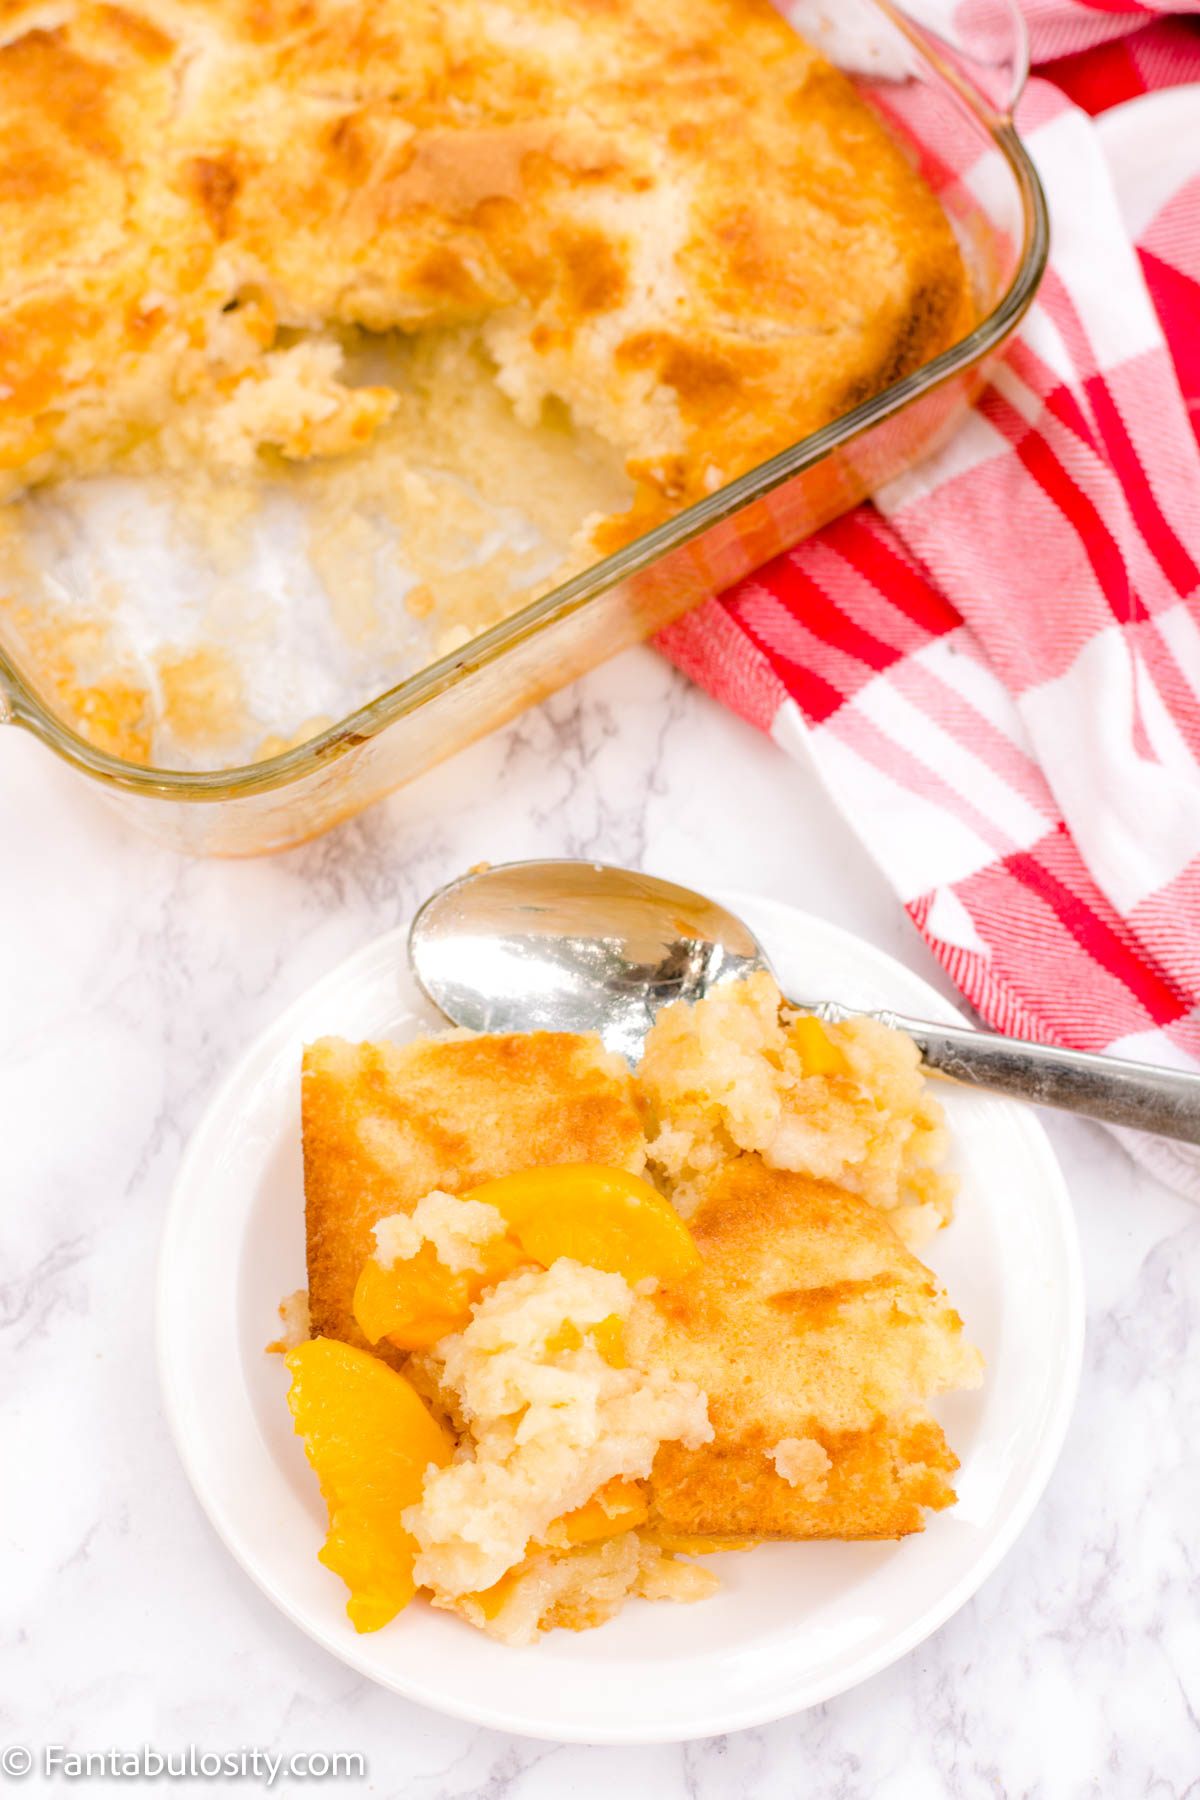 Single serving of peach cobbler on plate